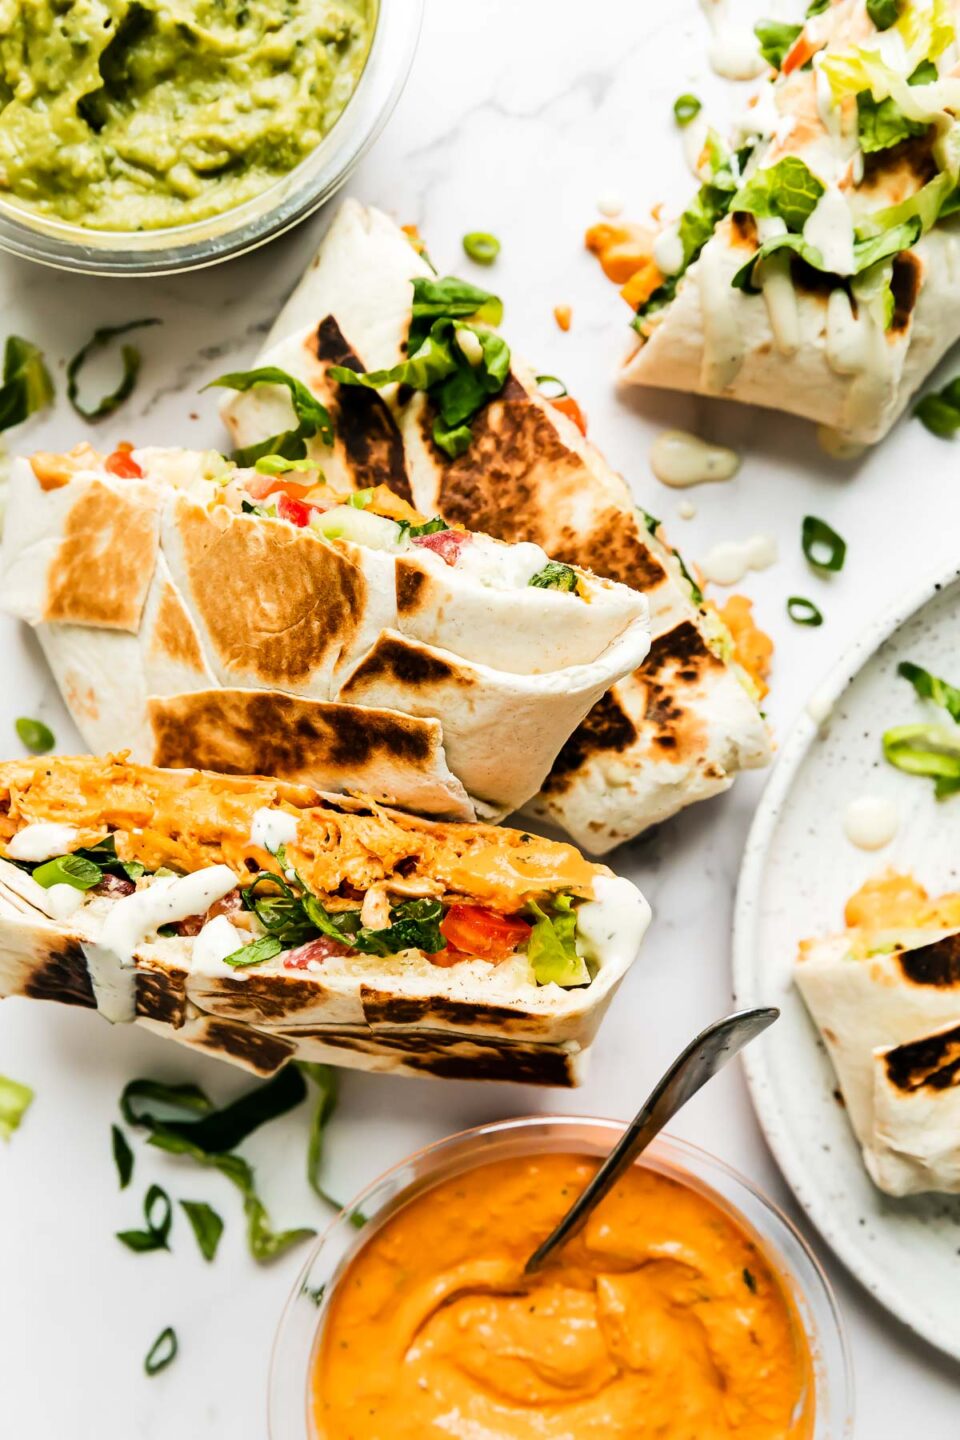 Five buffalo chicken crunch wraps are arranged atop a white and gray marble surface. An open container of Good Foods Plant Based Buffalo Dip and a second open container of Good Foods Chunky Guacamole rest alongside the crunchwraps. A spoon rests inside of the Good Foods Plant Based Buffalo Dip.